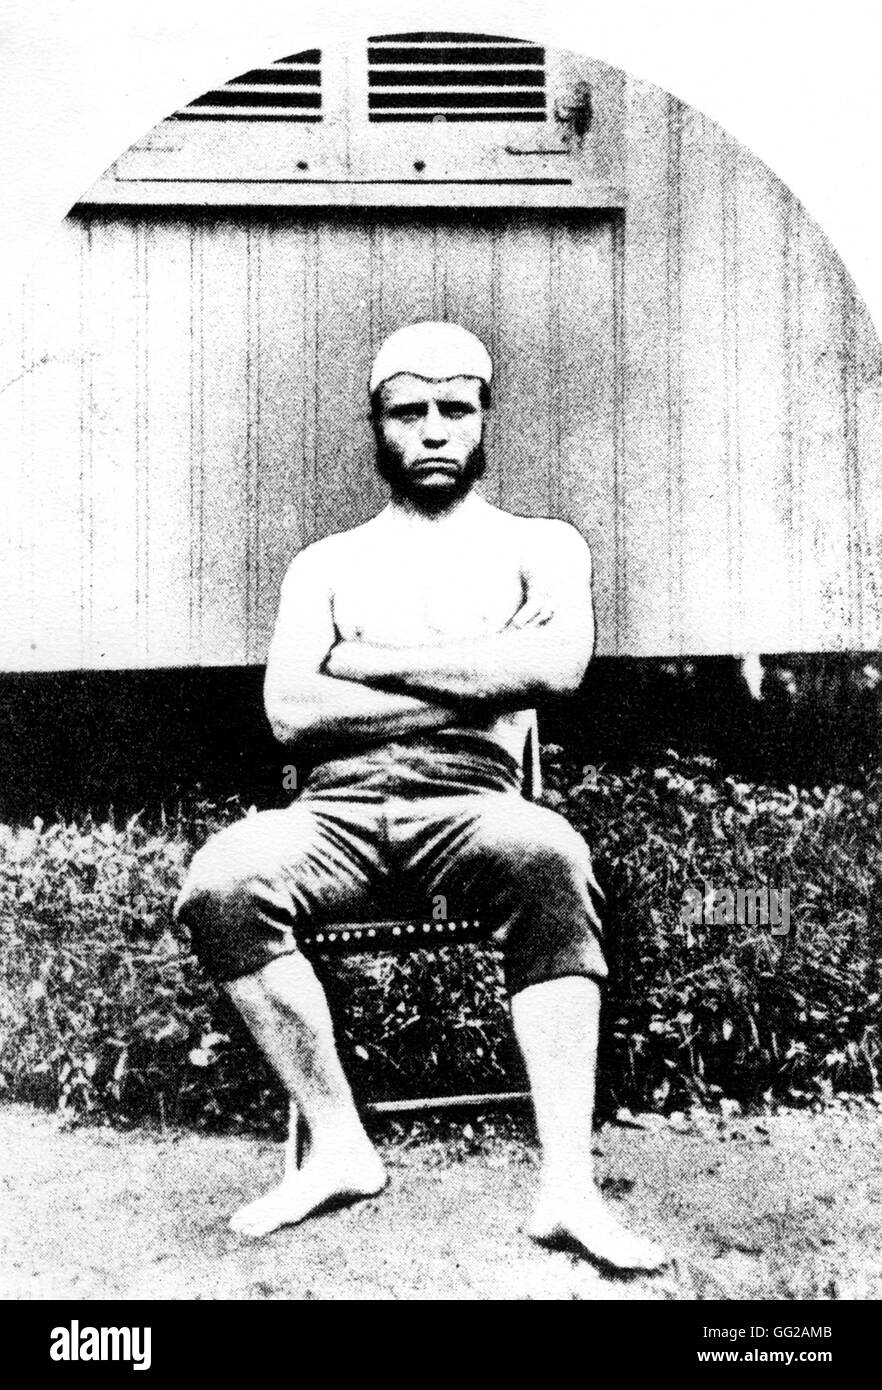 Theodore Roosevelt (1858-1919) in sportswear at the University of Harvard 19th century United States New York Public Library Stock Photo